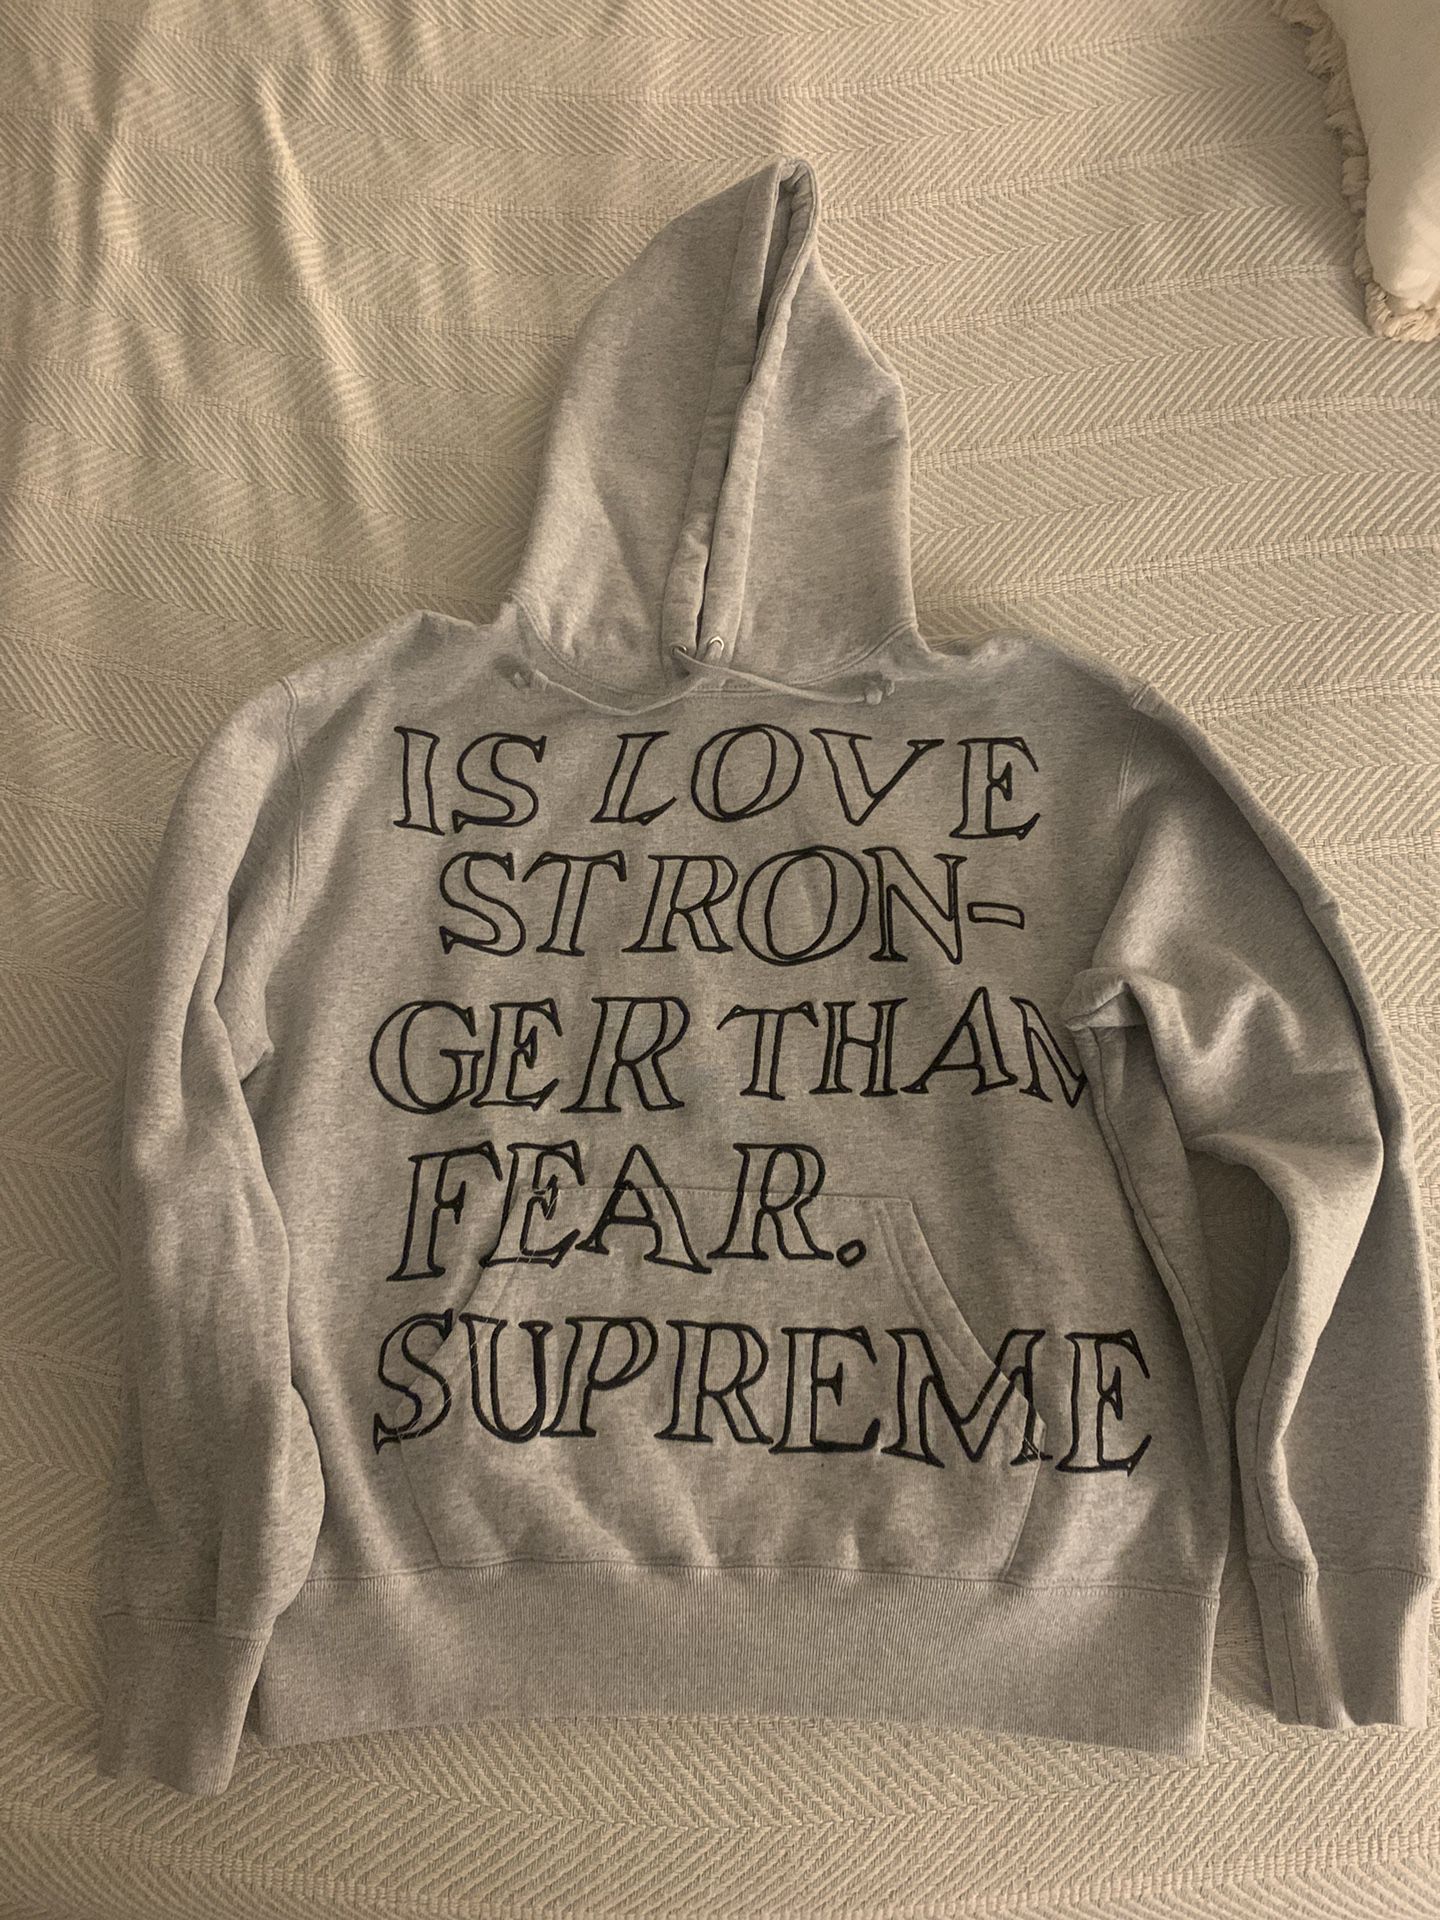 Supreme Stronger Than Fear Hooded Sweatshirt, Size Small 